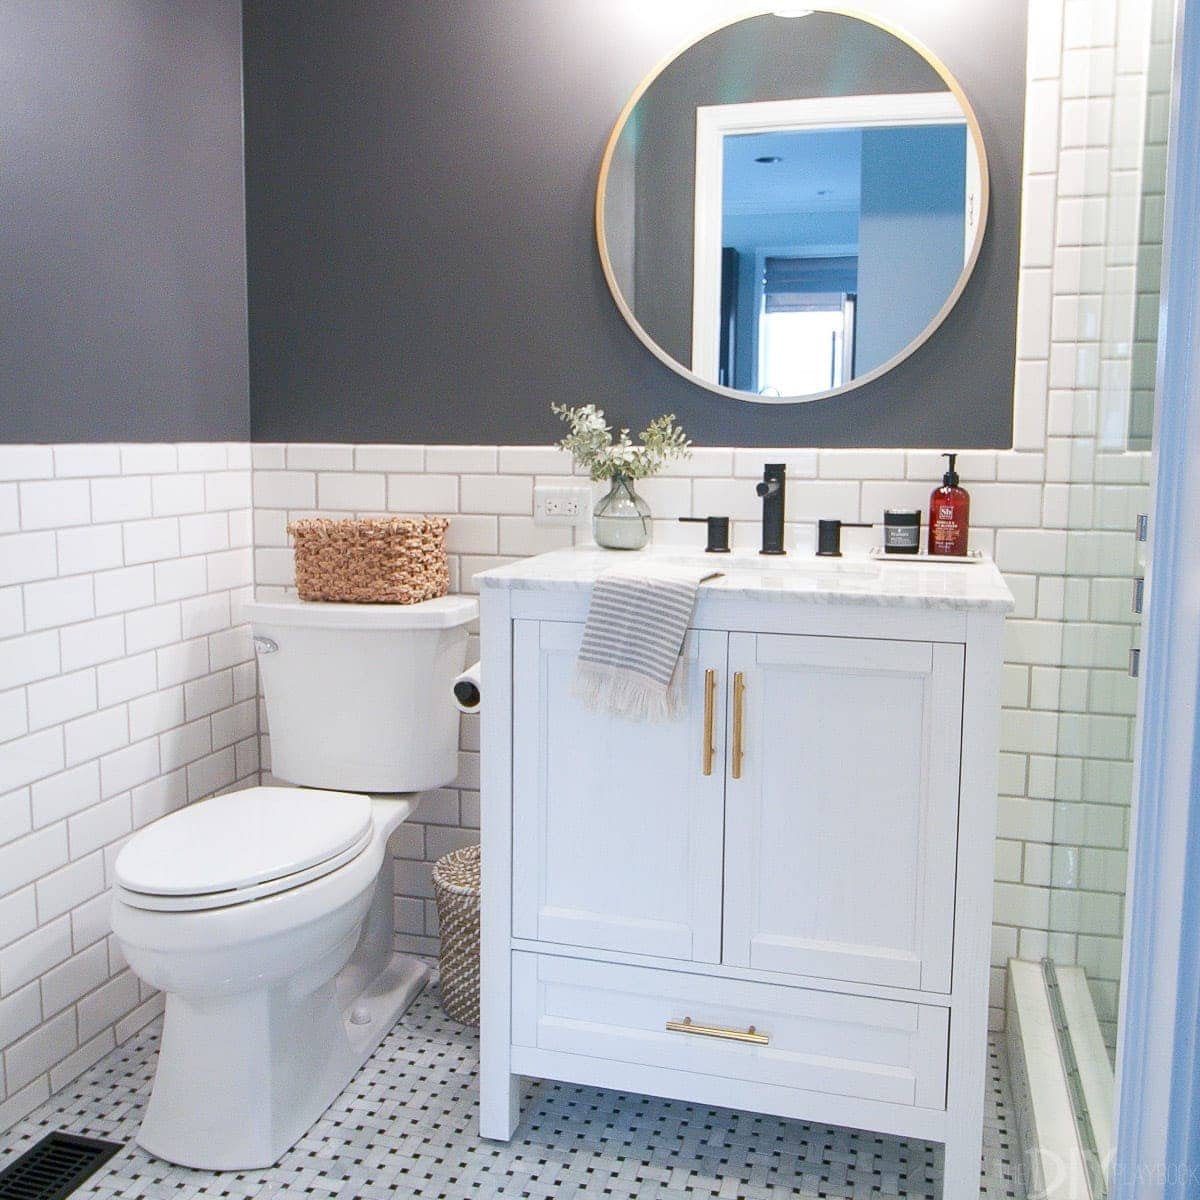 Our bathroom renovation reveal with subway tile